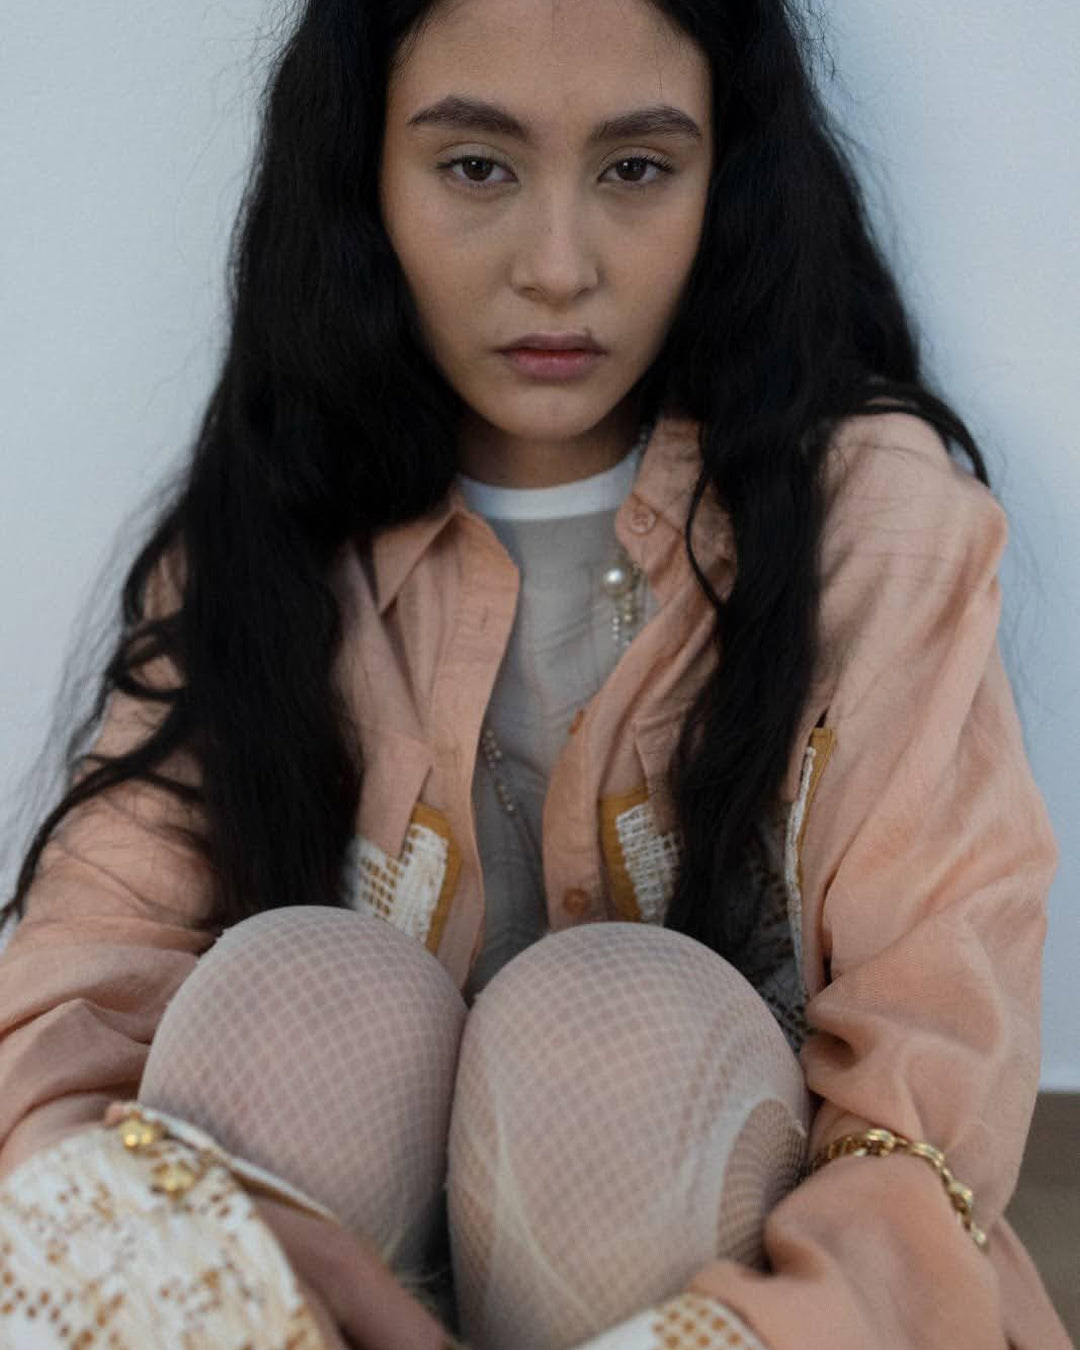 Portrait of a young woman in a relaxed pose, wearing a textured, pastel outfit, promoting eco-conscious choices.